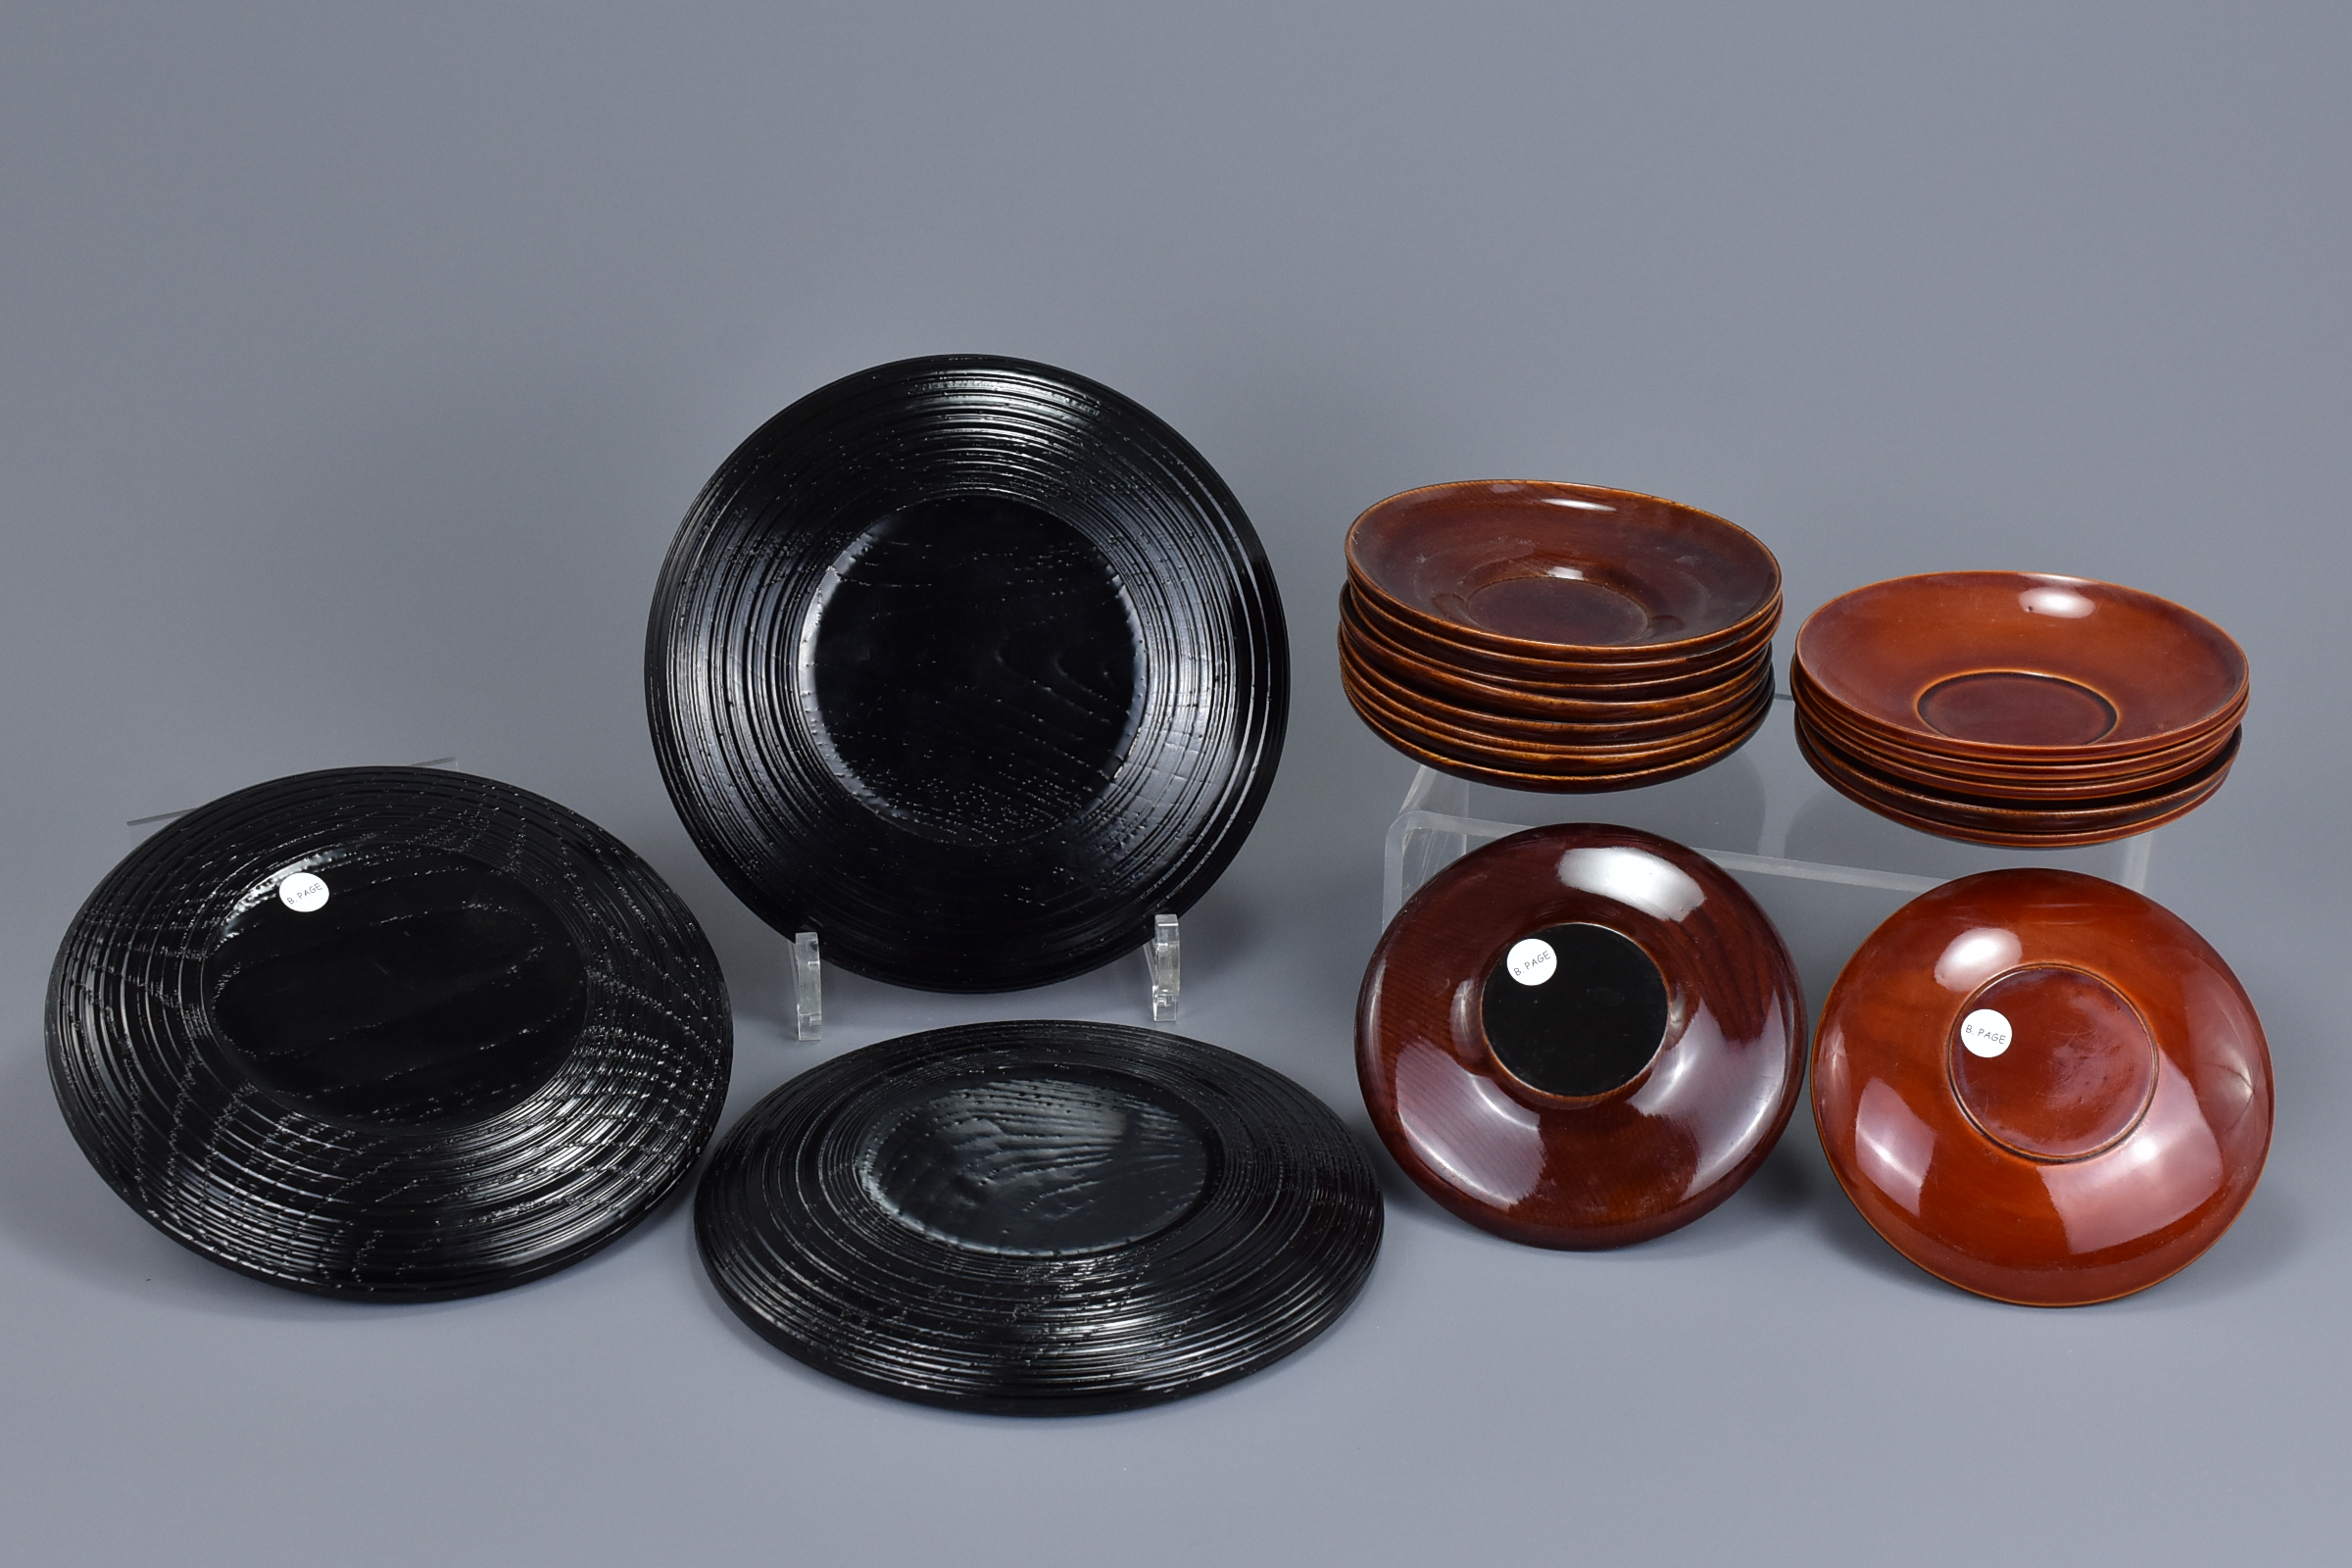 18 Japanese Lacquered Wood Dishes (3 Sets) - Image 2 of 3